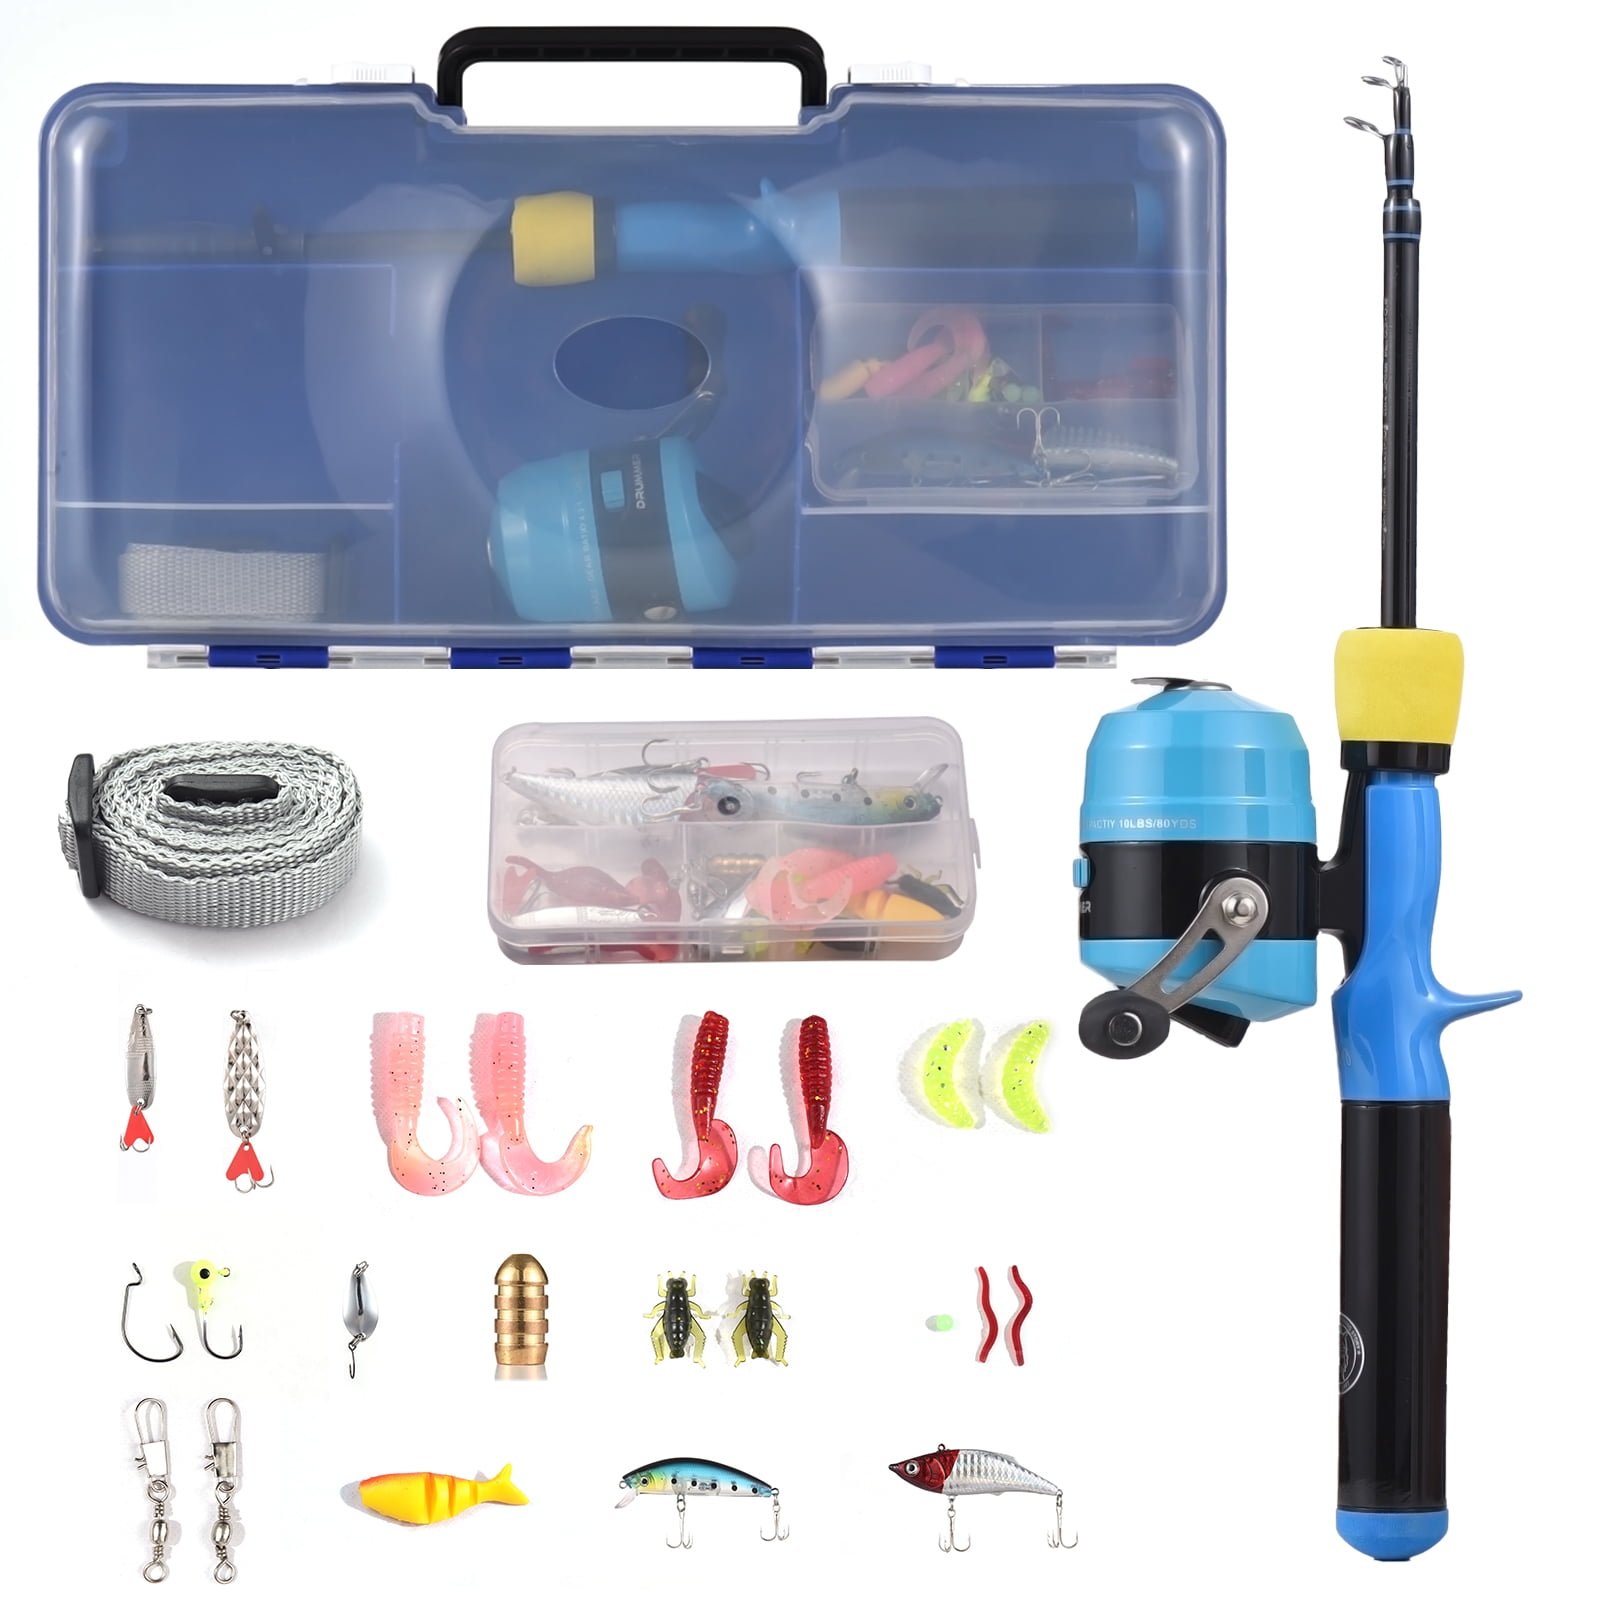 Lixada Kids Fishing Pole Kit, 47'' Telescopic Rod and Reel Beginner Combo  with Spincast Reel,Tackle Box,Fishing Gear Gifts for Boys,Girls, Toddler, Youth 